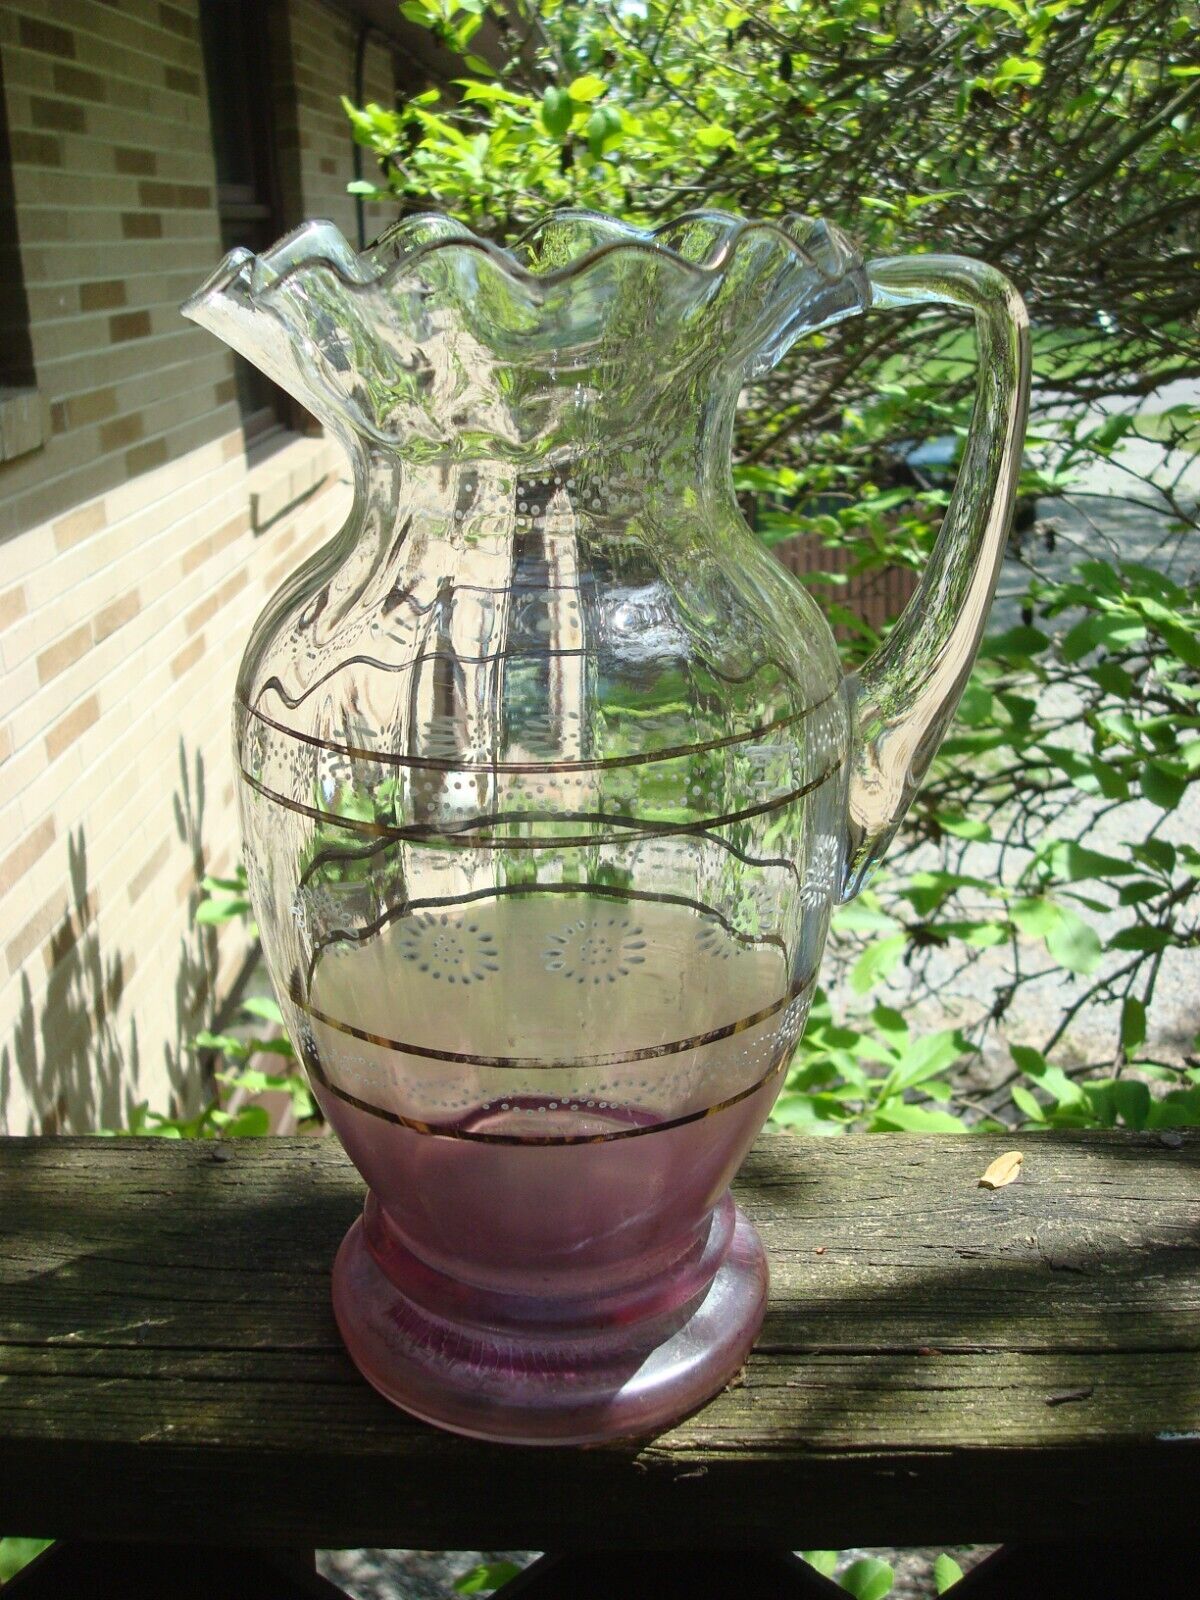 Antique Glass Water Pitcher - Guessing 1930s - Beautiful